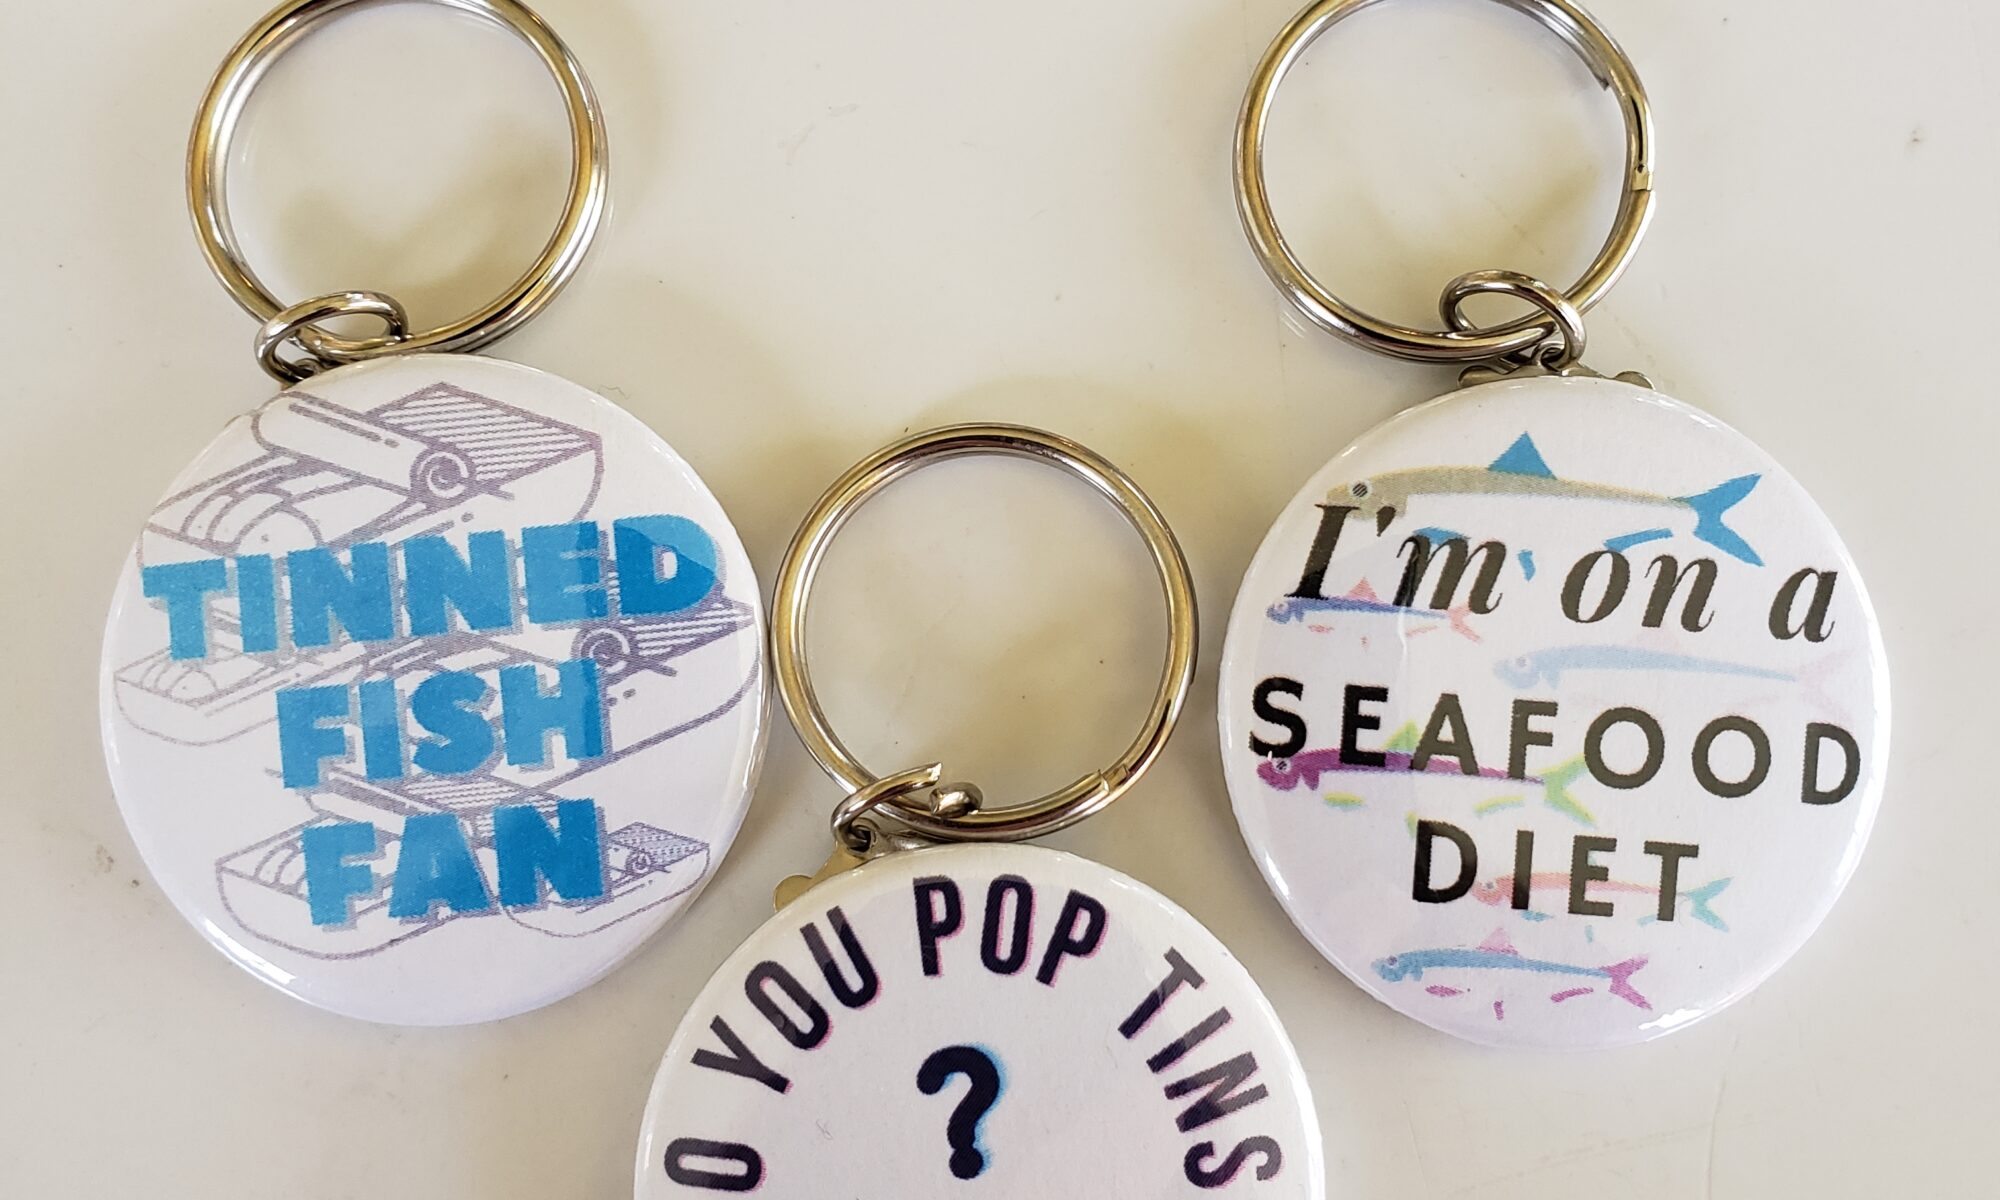 Image of various fish keychains